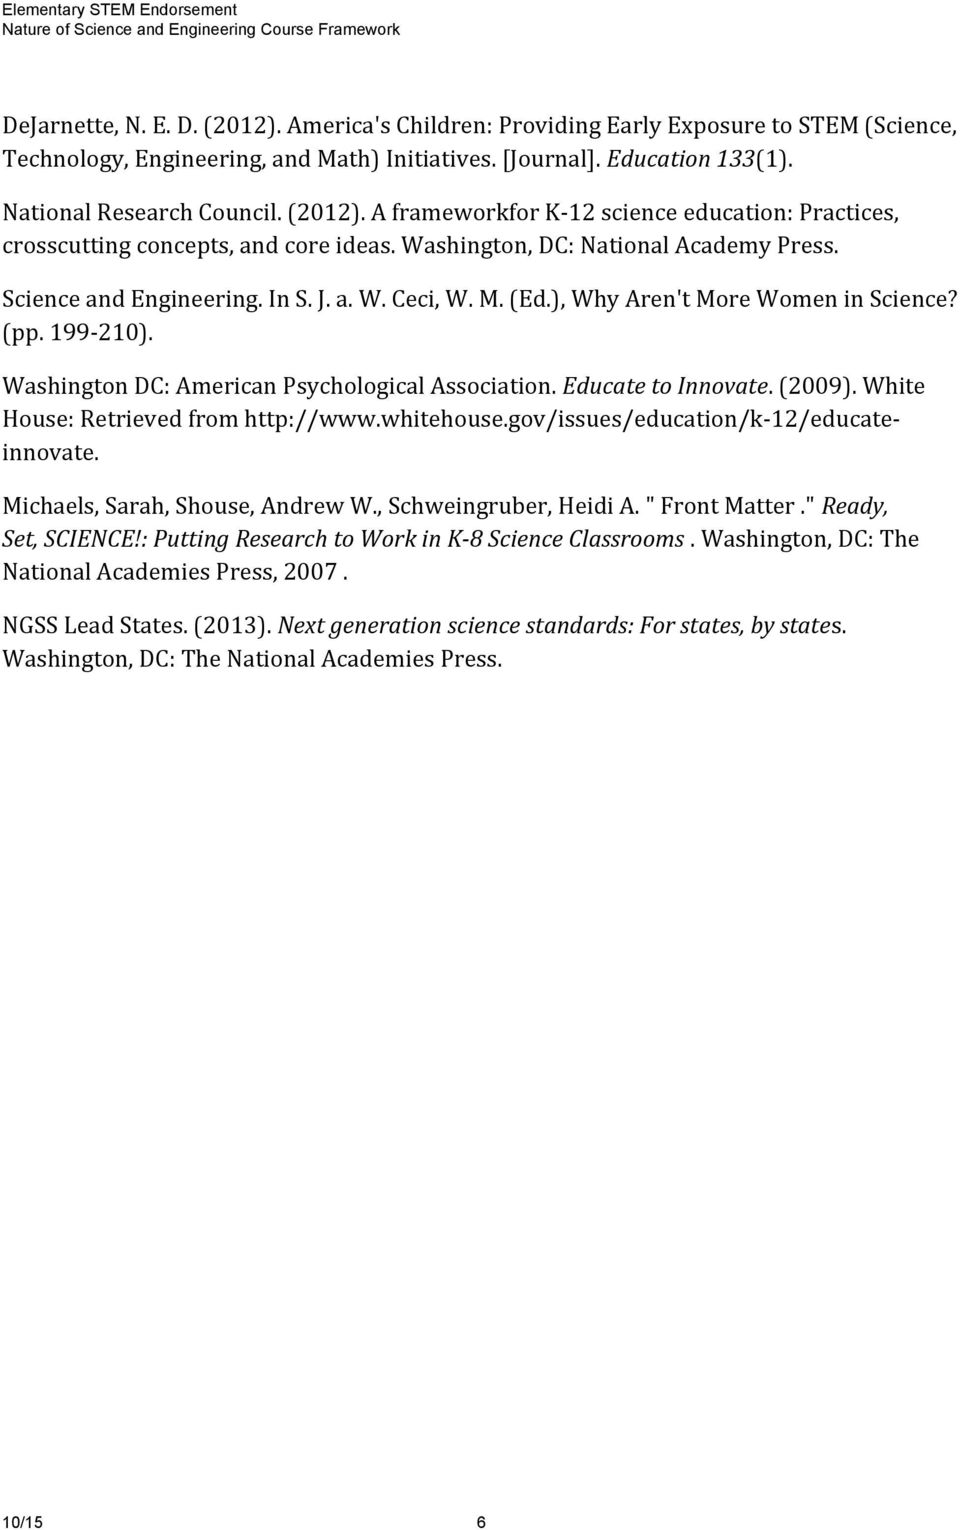 ), Why Aren't More Women in Science? (pp. 199-210). Washington DC: American Psychological Association. Educate to Innovate. (2009). White House: Retrieved from http://www.whitehouse.